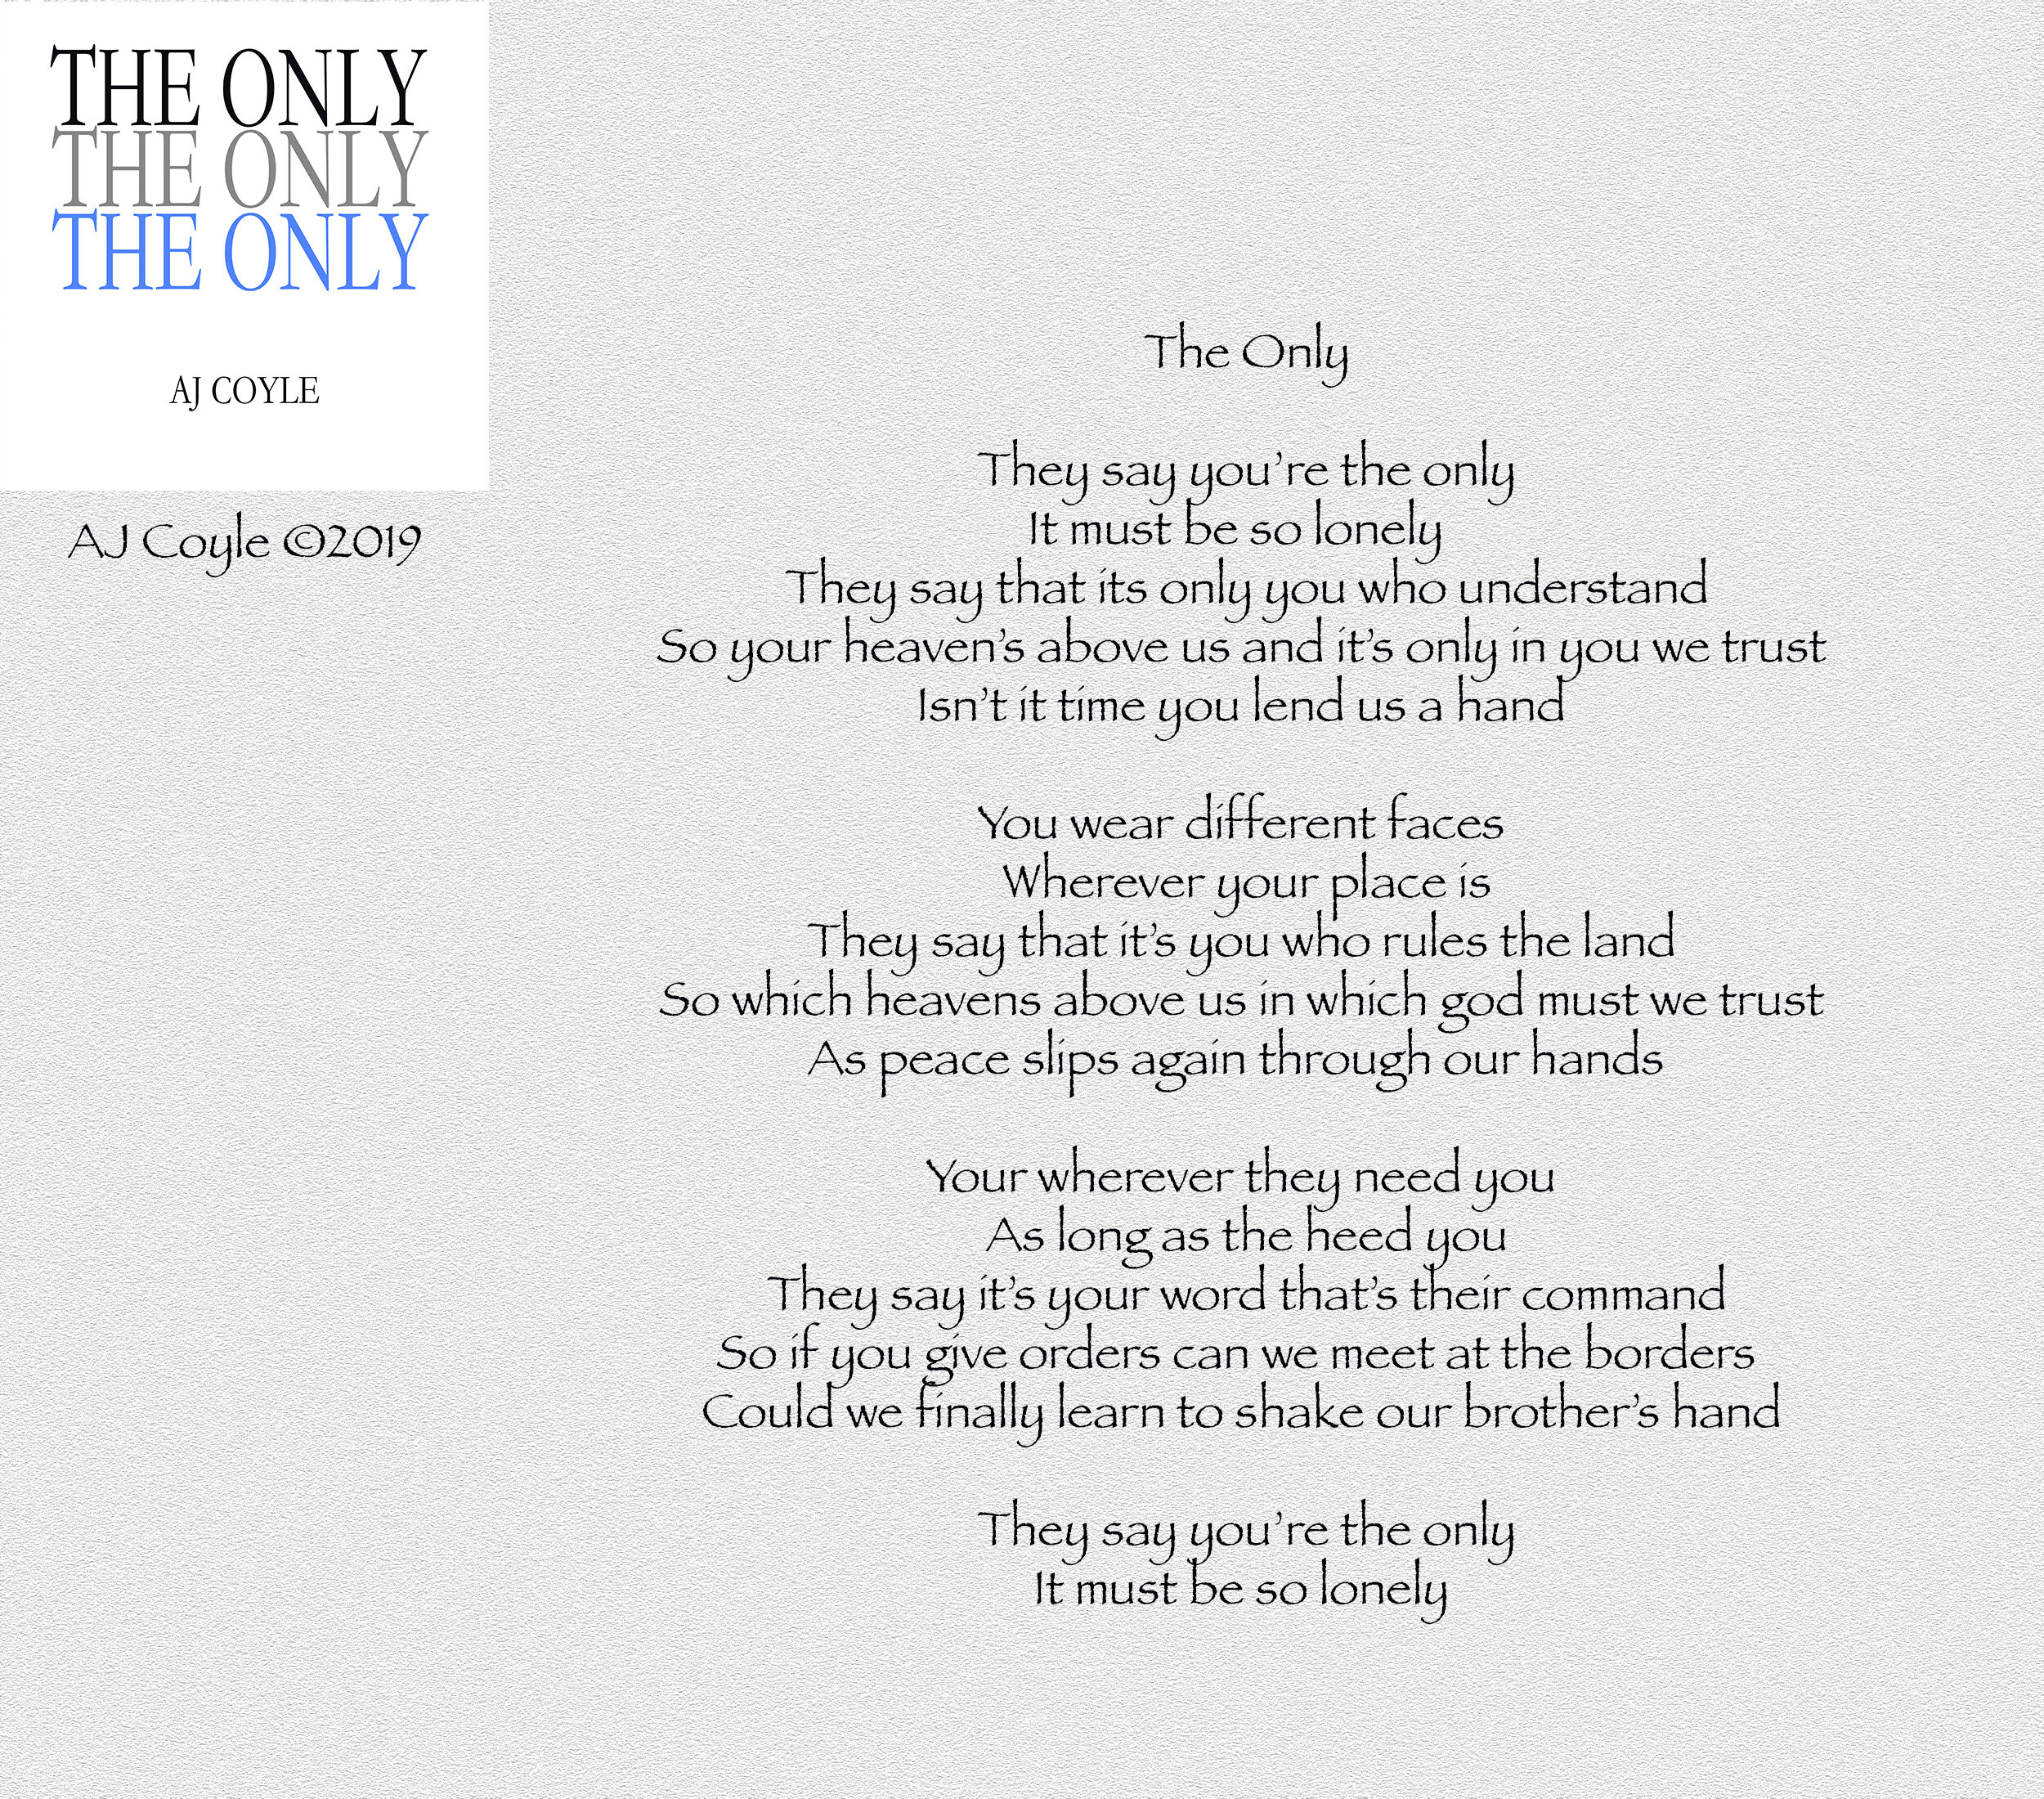 The Only - AJ Coyle